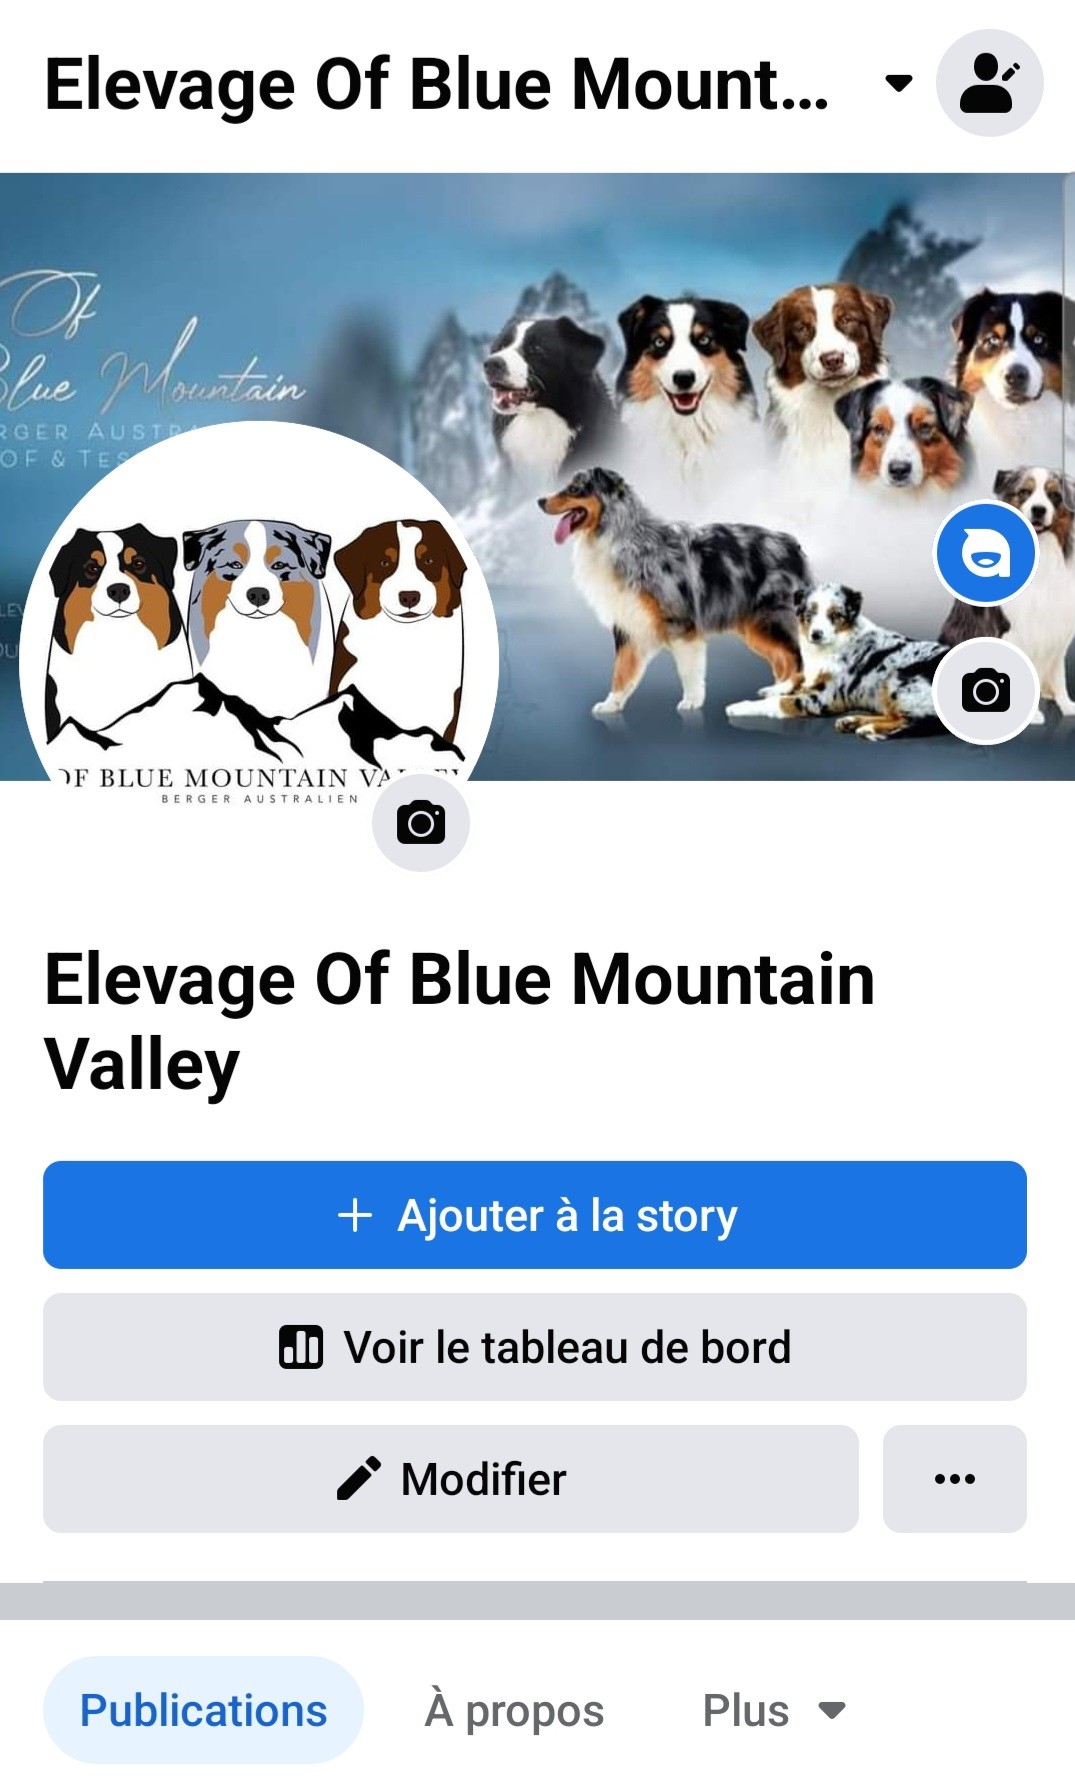 Of Blue Mountain Valley